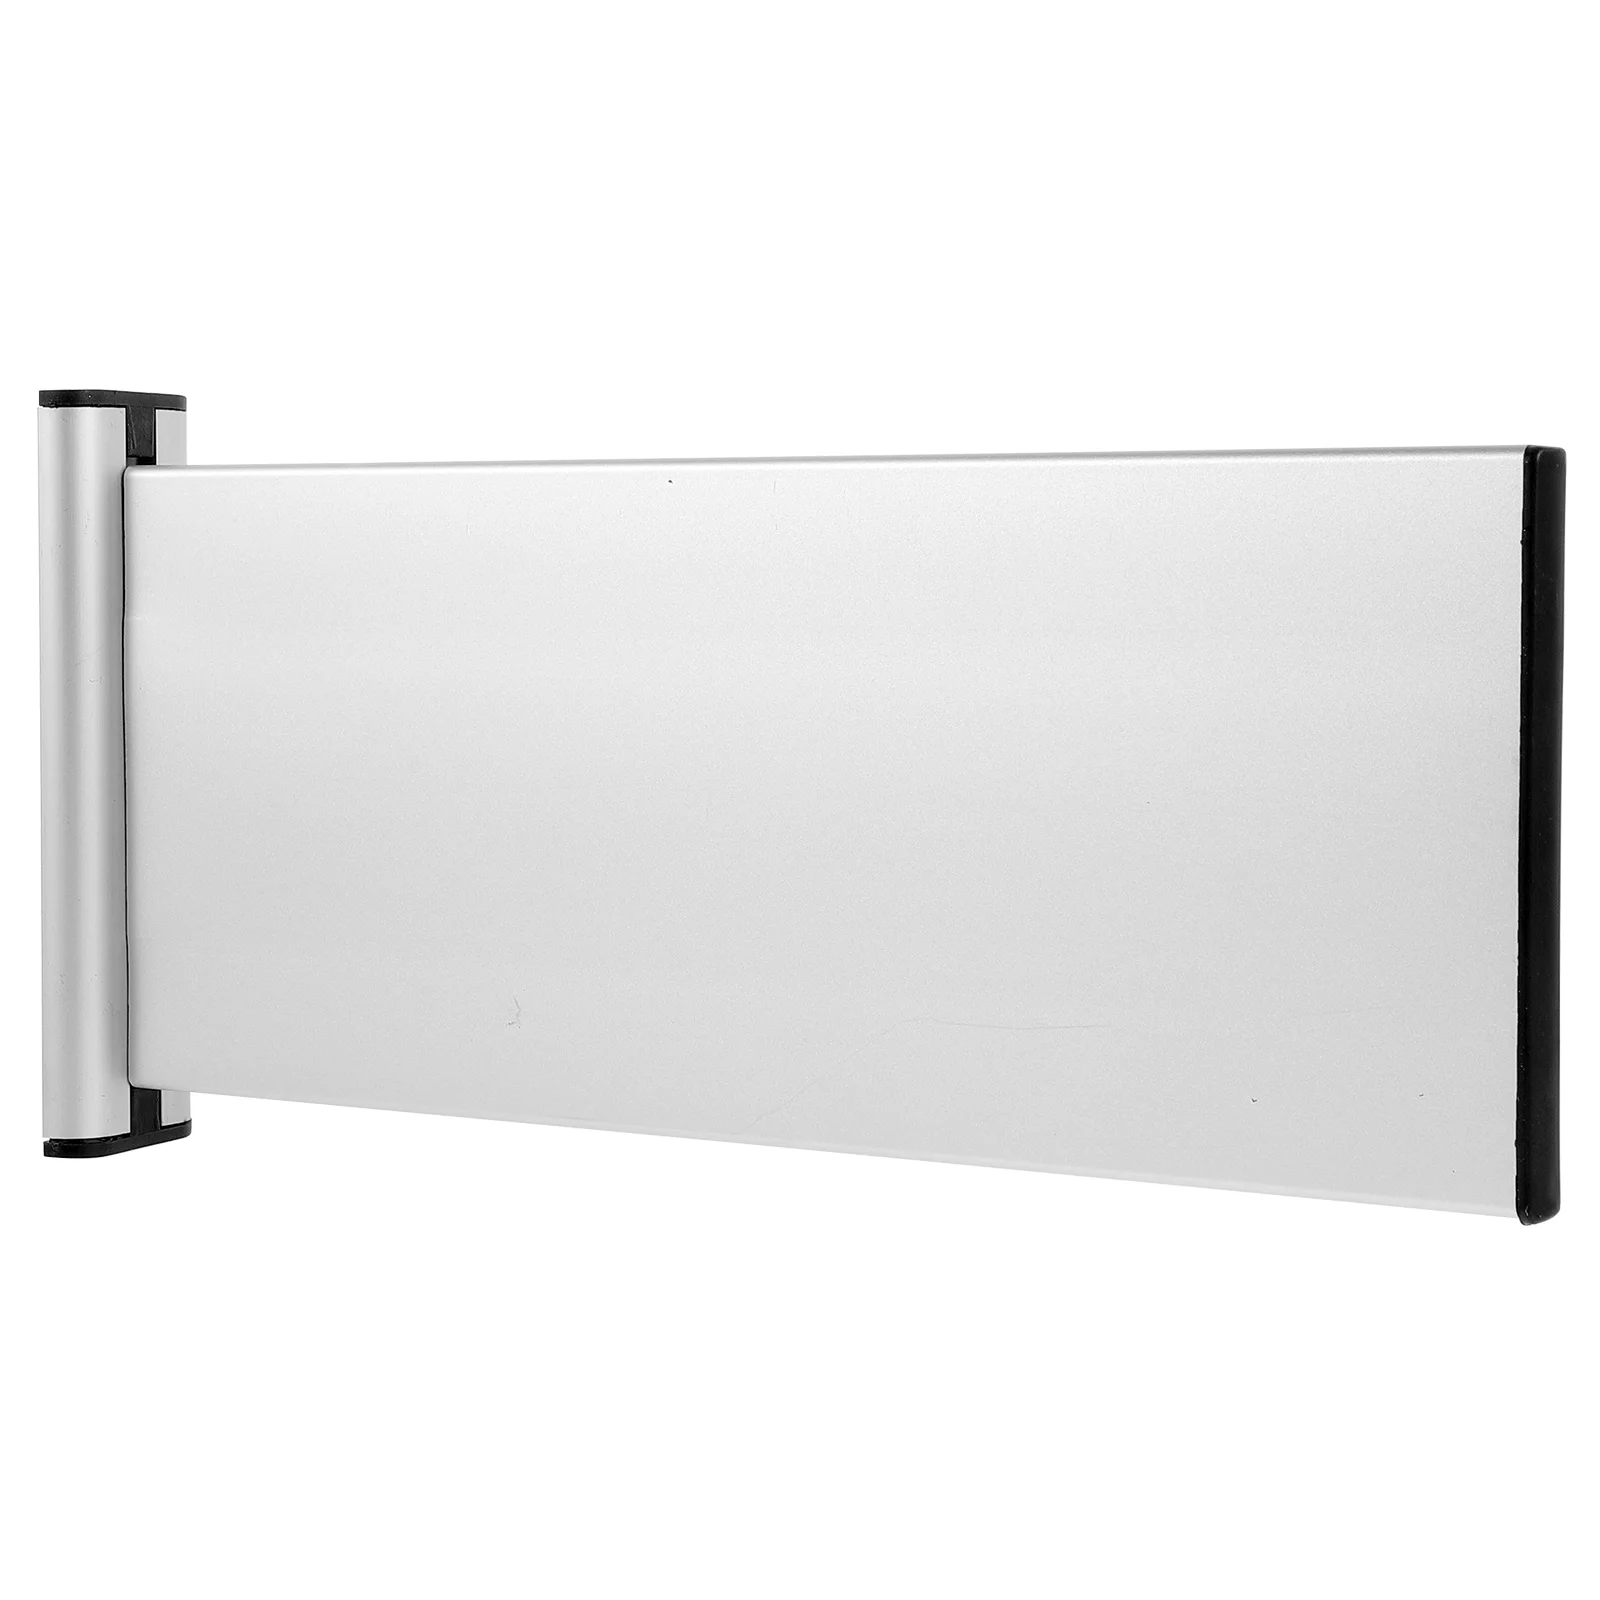 

Plate Name Door Sign Office Display Nameplate Blank Wall Frame Metal Aluminum Business Holder Mount Doors Classroom Alloy The